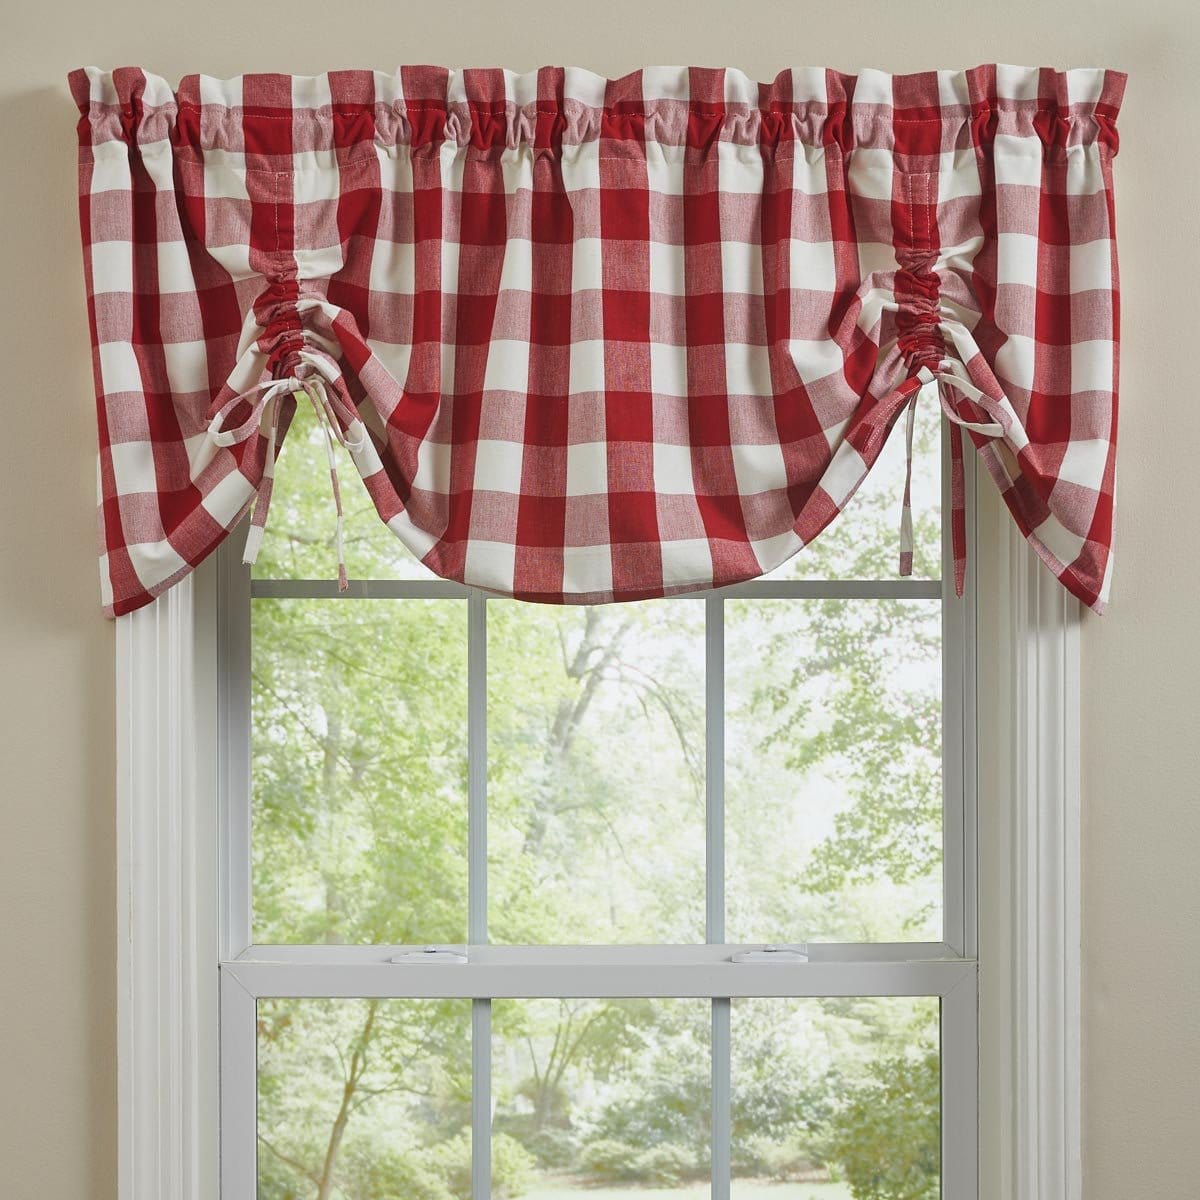 Wicklow Check in Red Tie Up Farmhouse Valance Lined-Park Designs-The Village Merchant